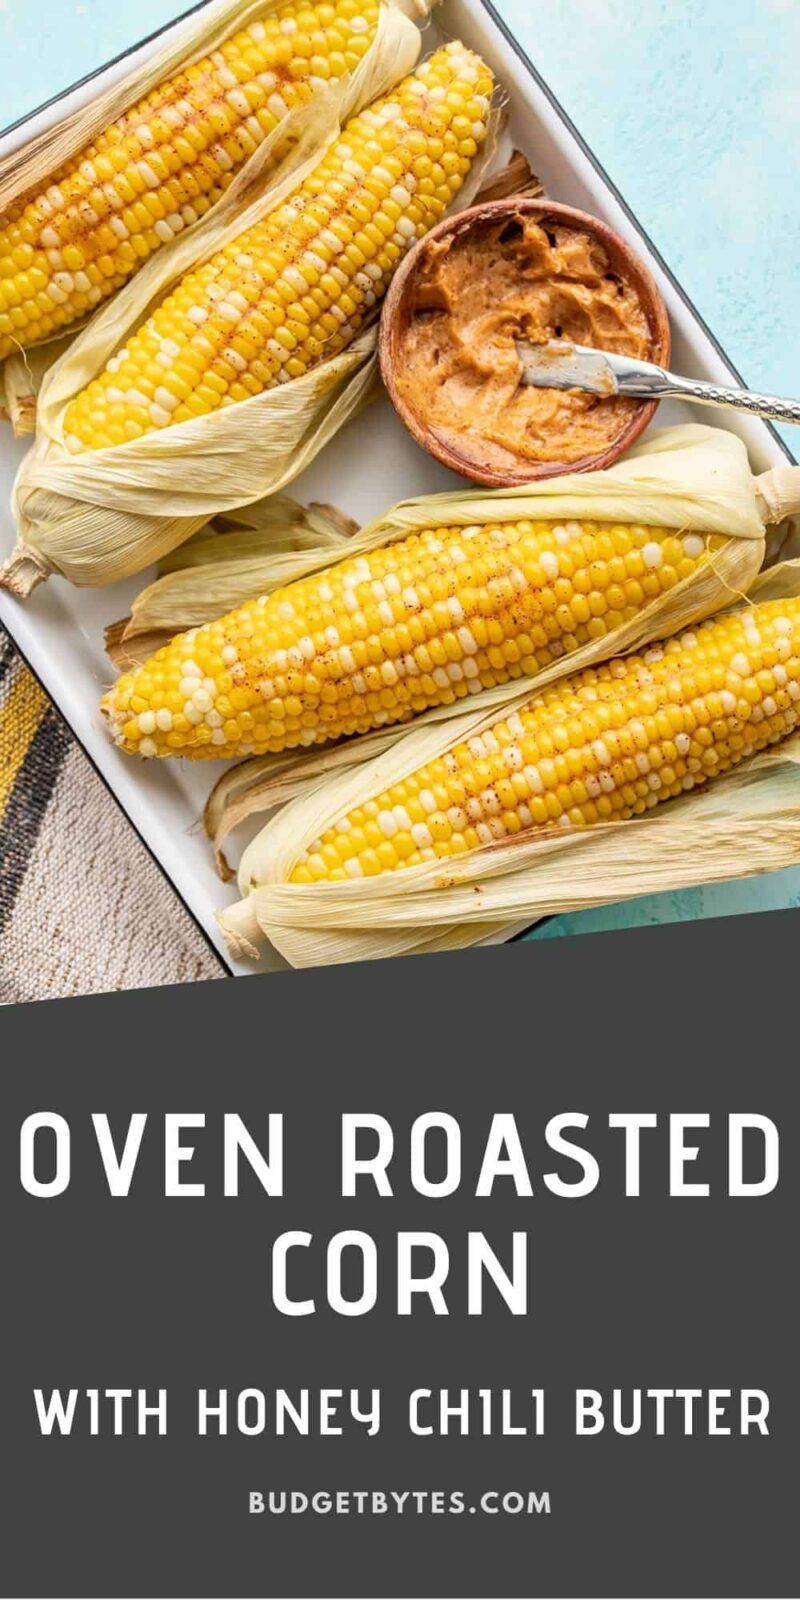 Oven roasted corn on a tray with a bowl of honey chili butter, title text at the bottom